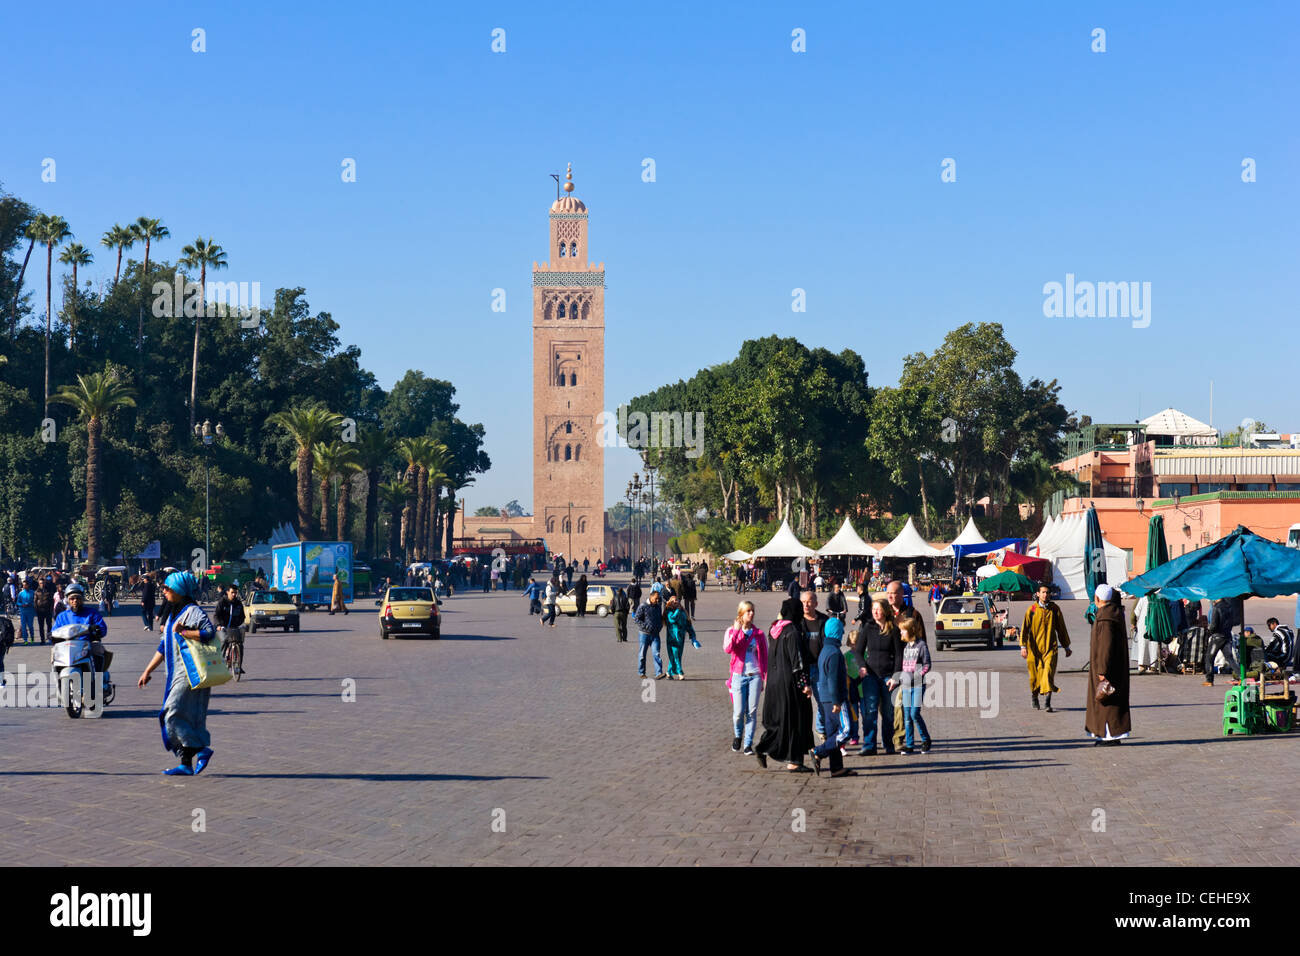 The minaret of the Koutoubia Mosque from Djemaa el Fna sqare, Marrakech, Morocco, North Africa Stock Photo